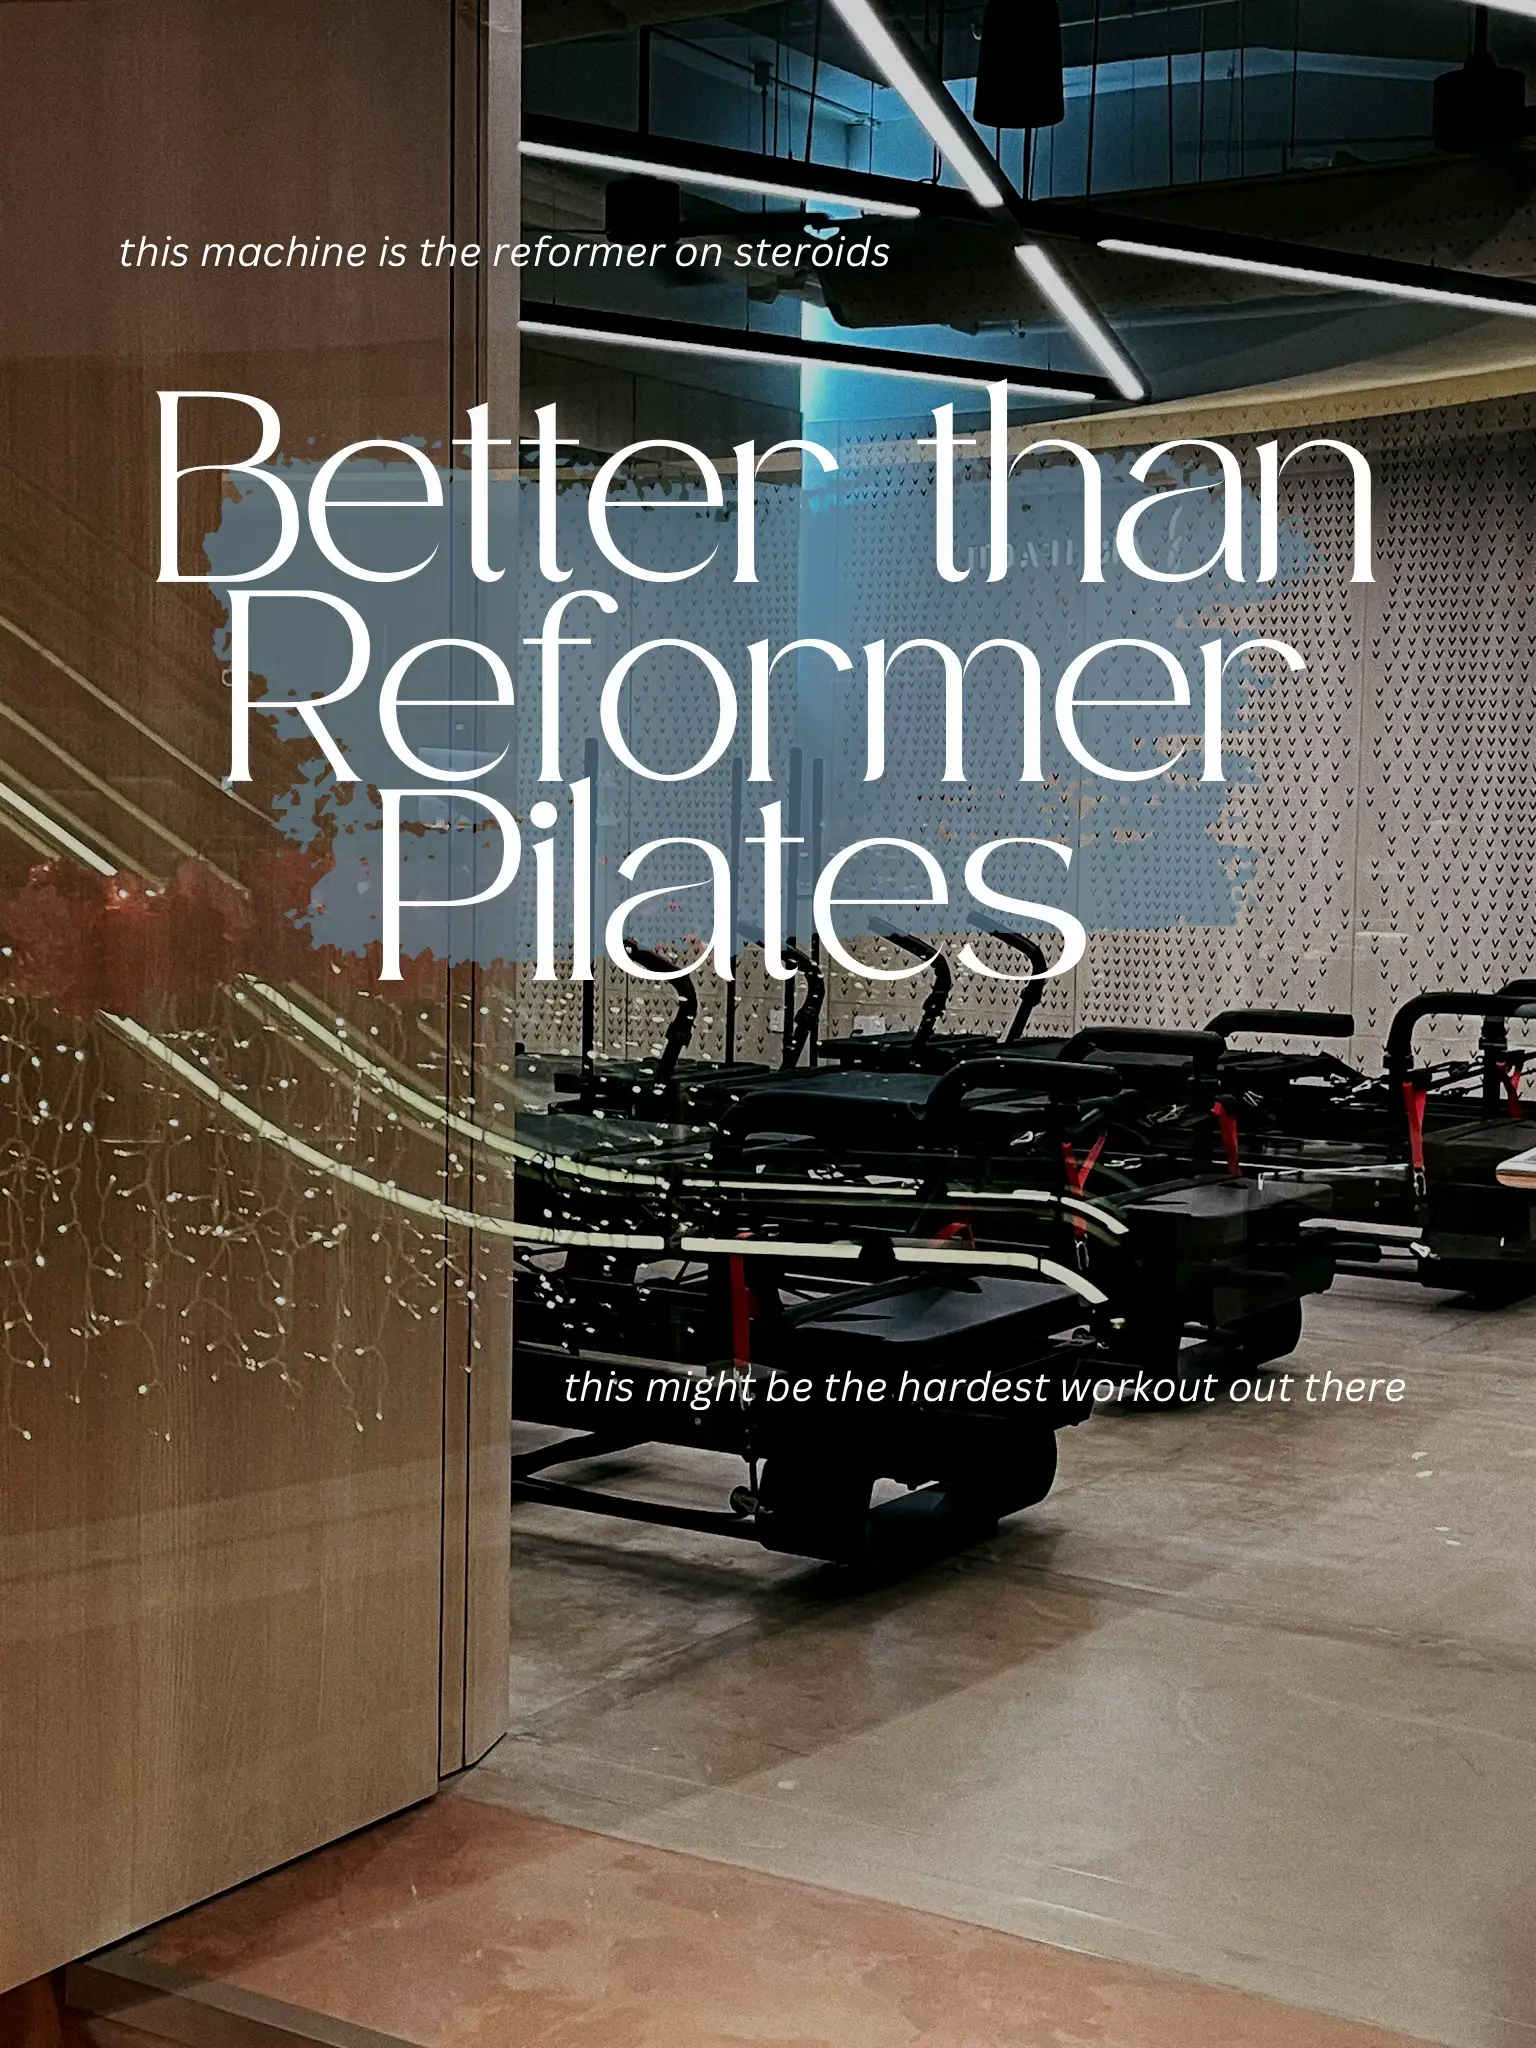 How my body changed with regular reformer pilates🩰